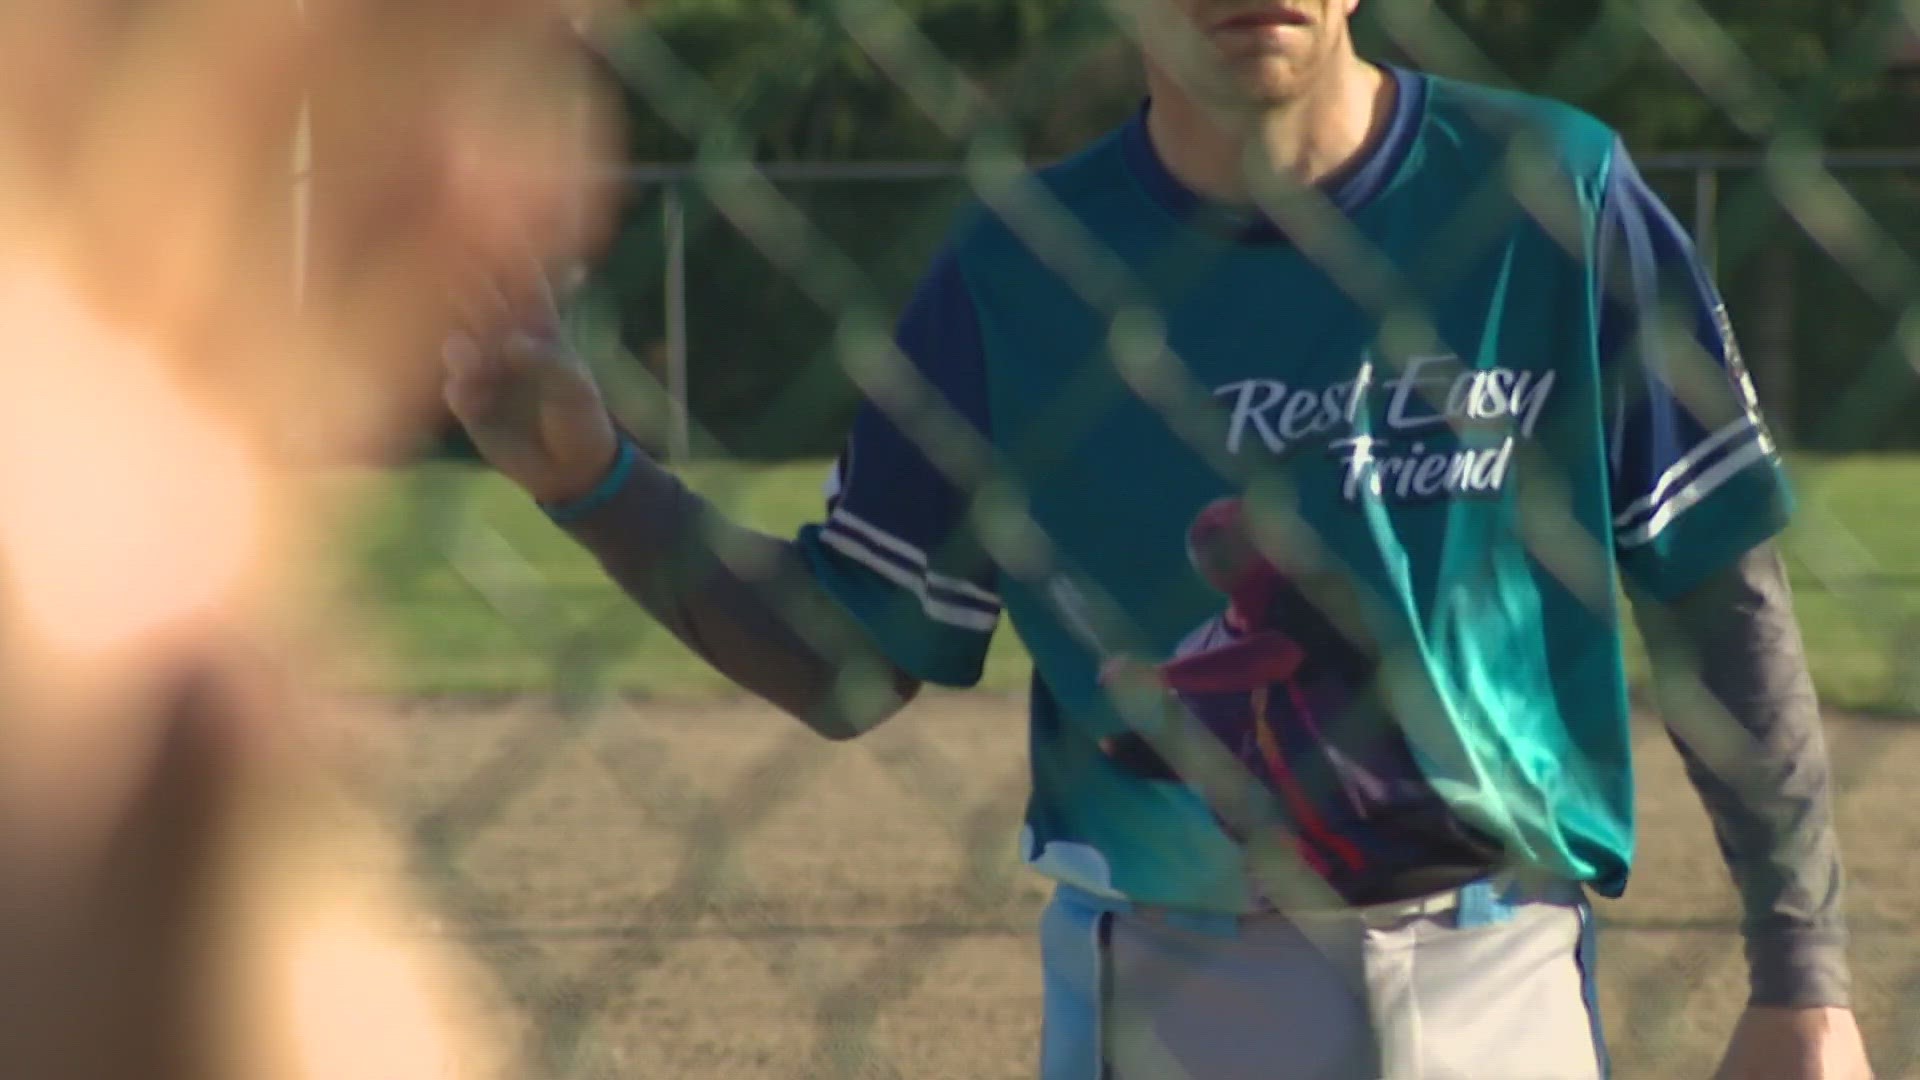 Hundreds of people participated in a two-day softball tournament in Bill Foust's memory. He was a pillar in the recovery community and the sober softball league.